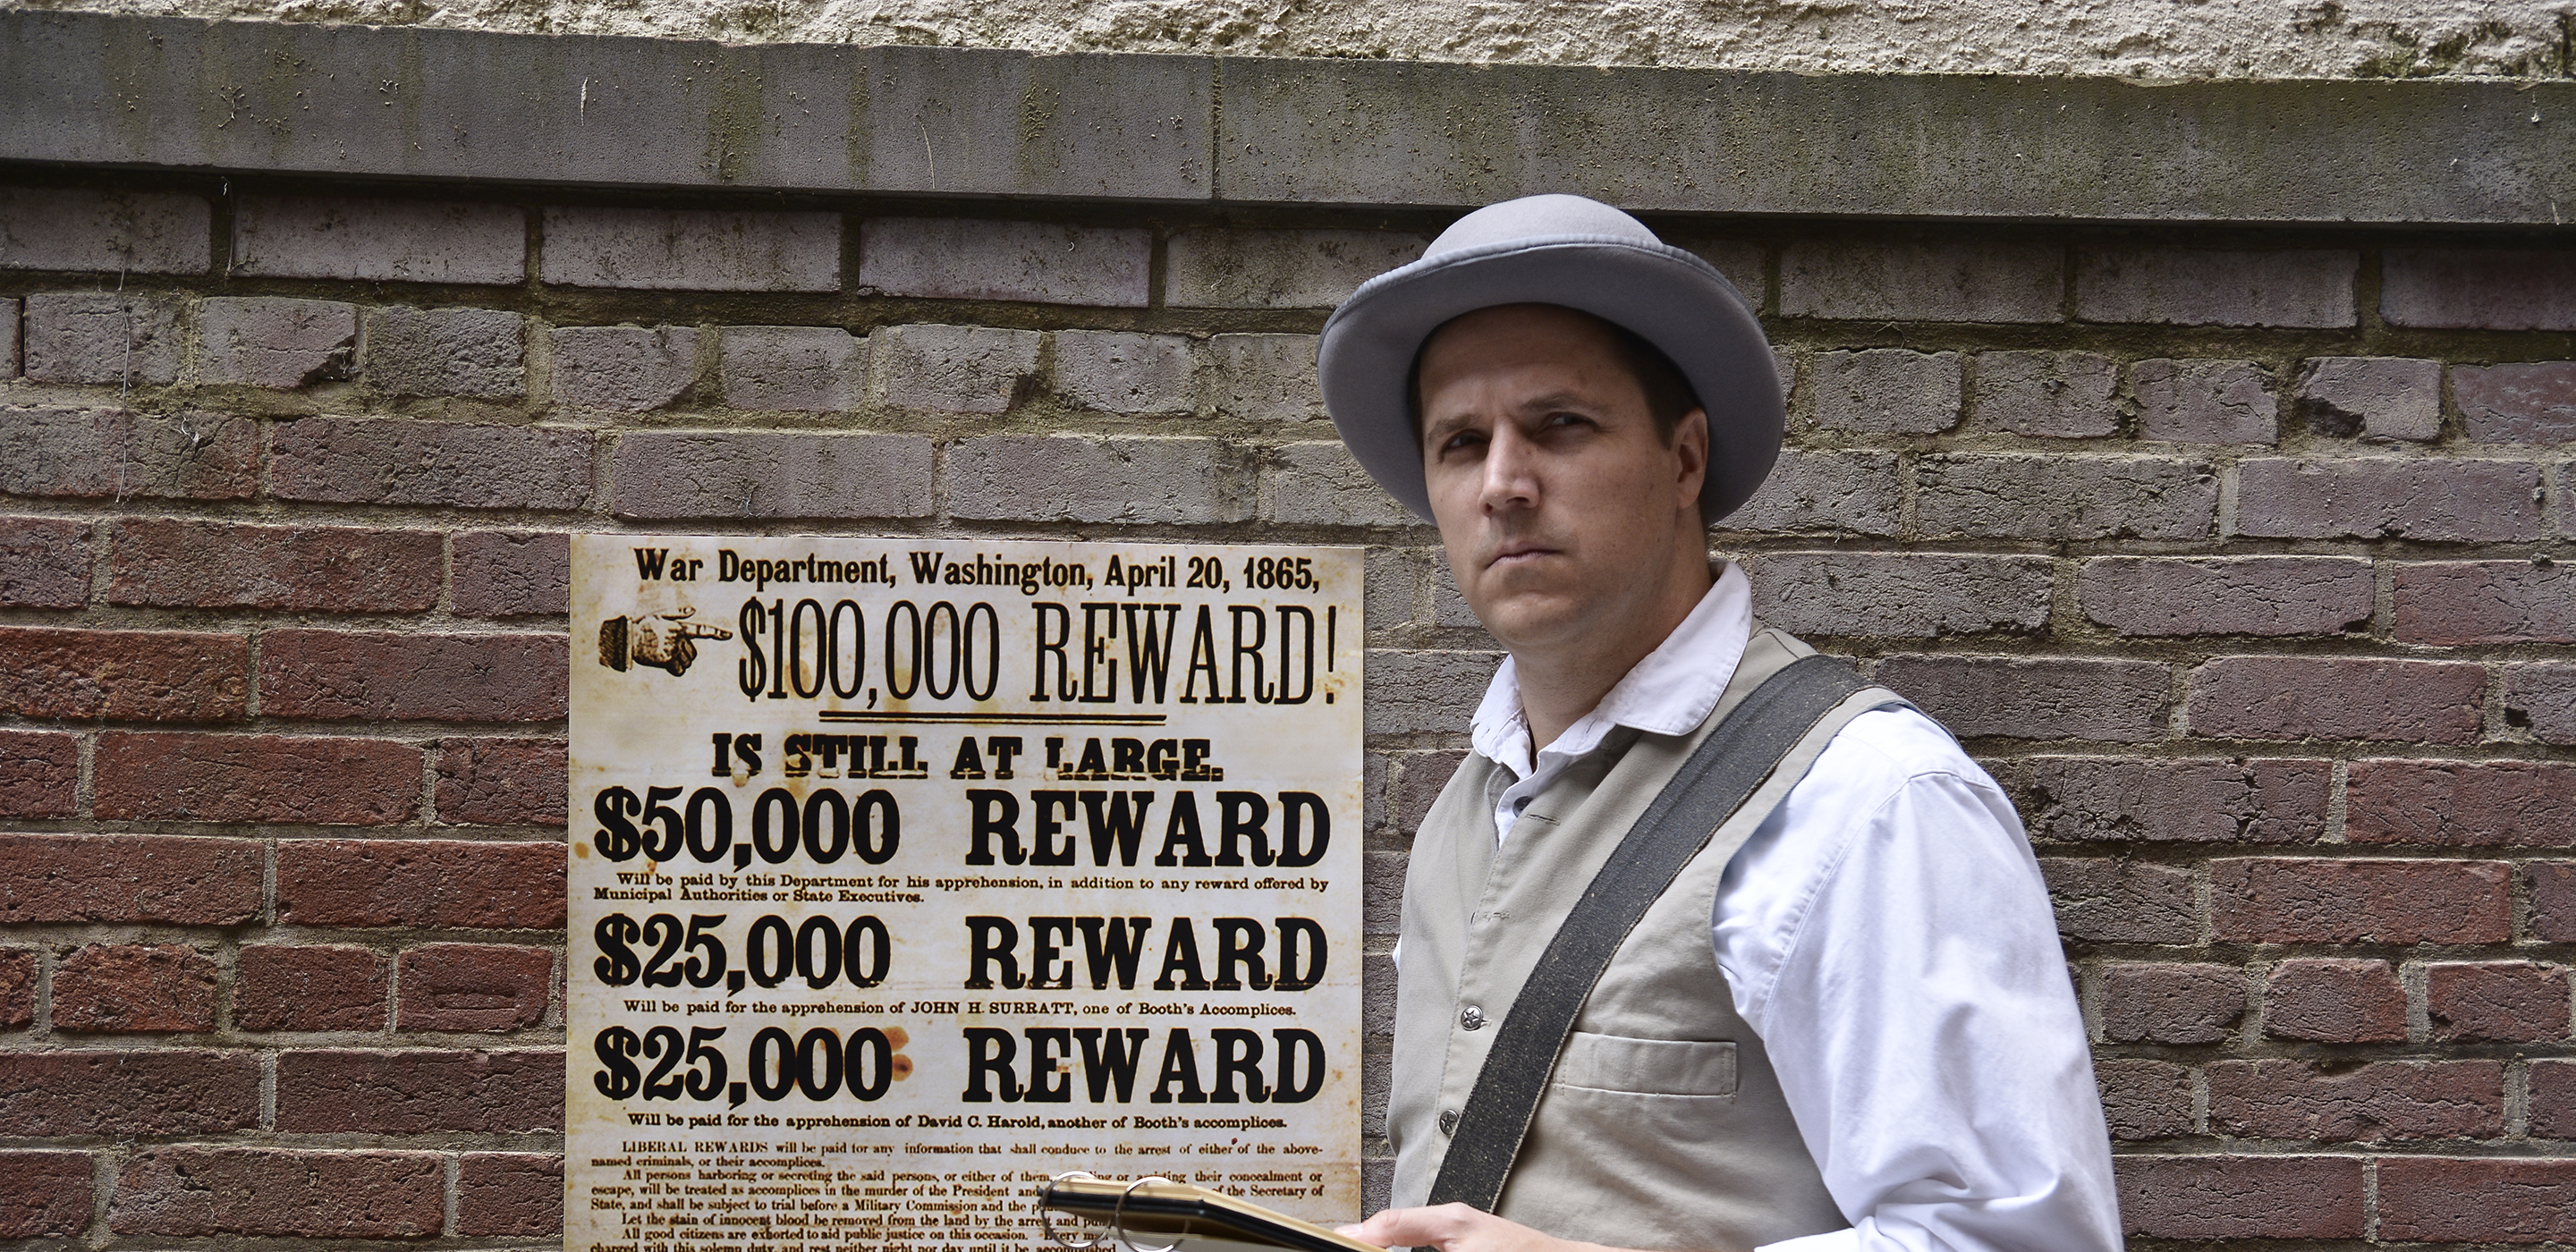 An actor stands dressed as an 1860s detective, holding a notepad. Behind him on a brick wall is posted a reward poster for the capture of Lincoln's assassin.